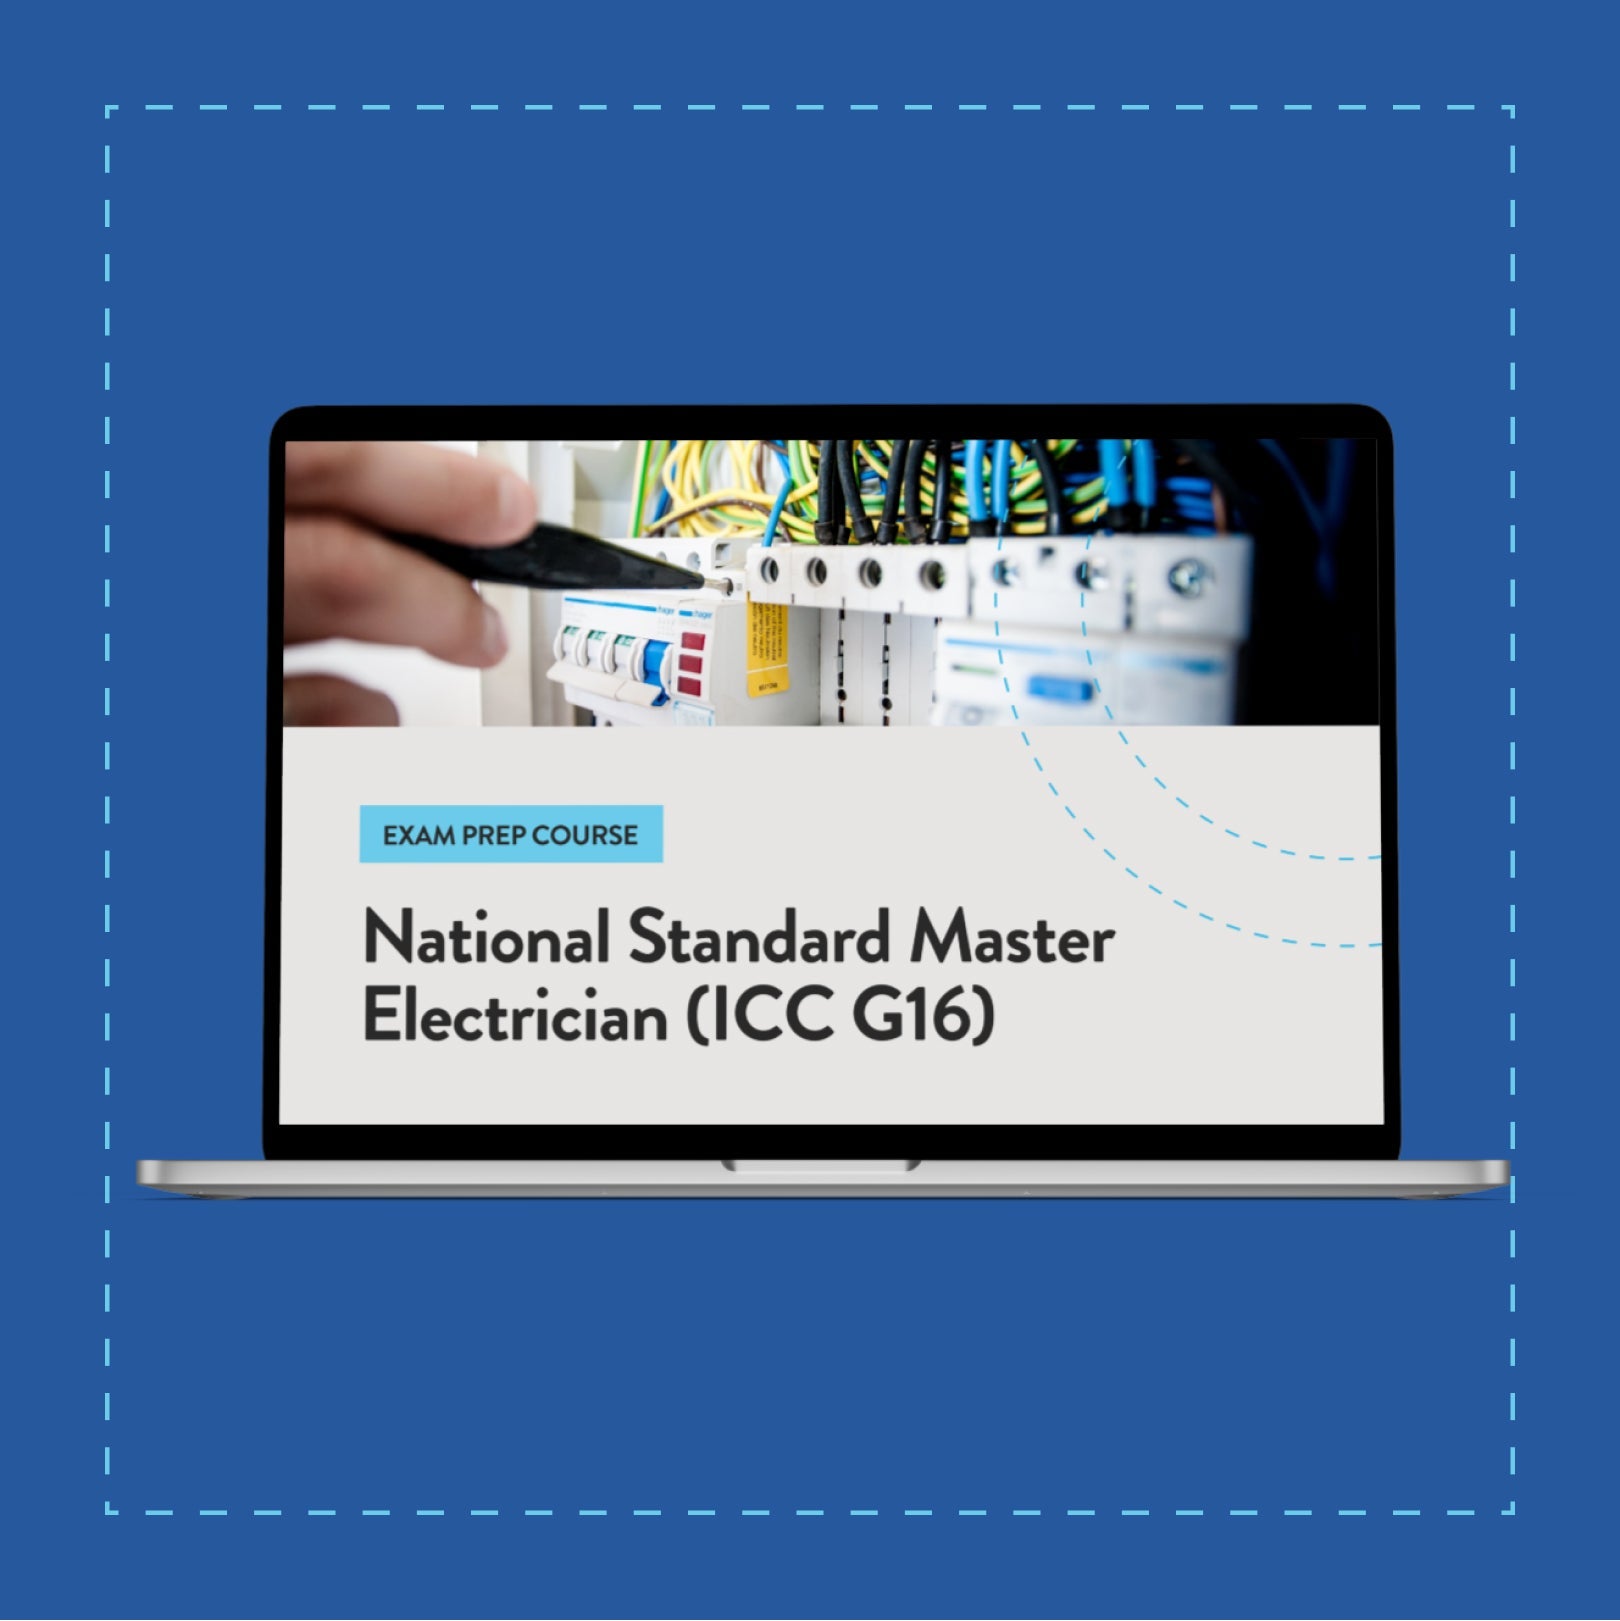 National Standard Master Electrician (ICC G16) Exam Prep Course